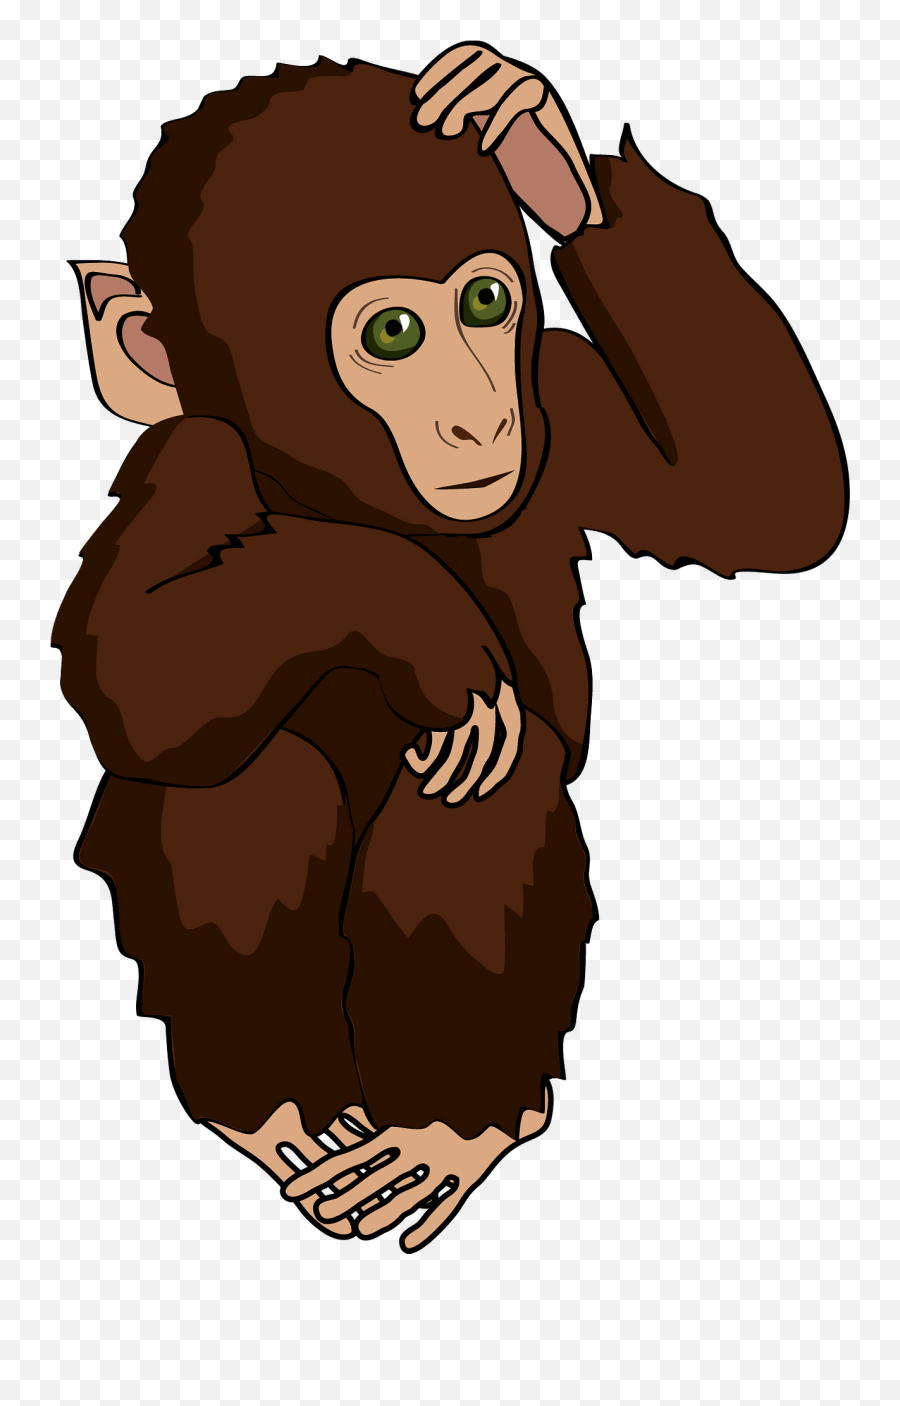 Monkey Clipart Free Download Transparent Png Creazilla - Monkey,Monkey Transparent